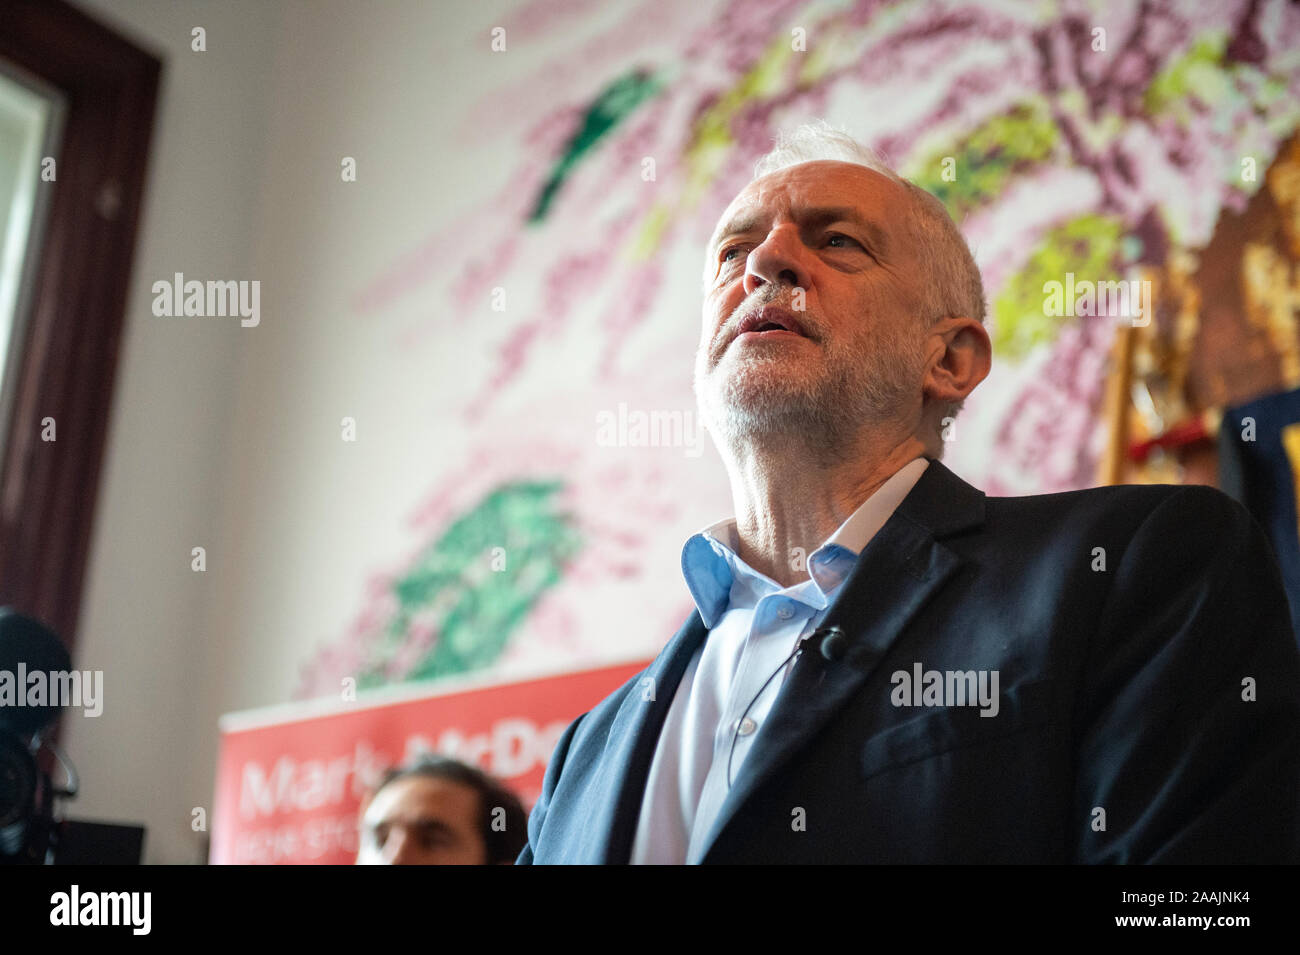 Staffordshire, UK. 22 November 2019. Labour leader Jeremy Corbyn at a Labour rally in Fenton, Stoke-on-Trent. The Stoke South seat is marginal with the Conservatives holding a majority of just over 600 votes. Credit: Benjamin Wareing/ Alamy Live News Stock Photo